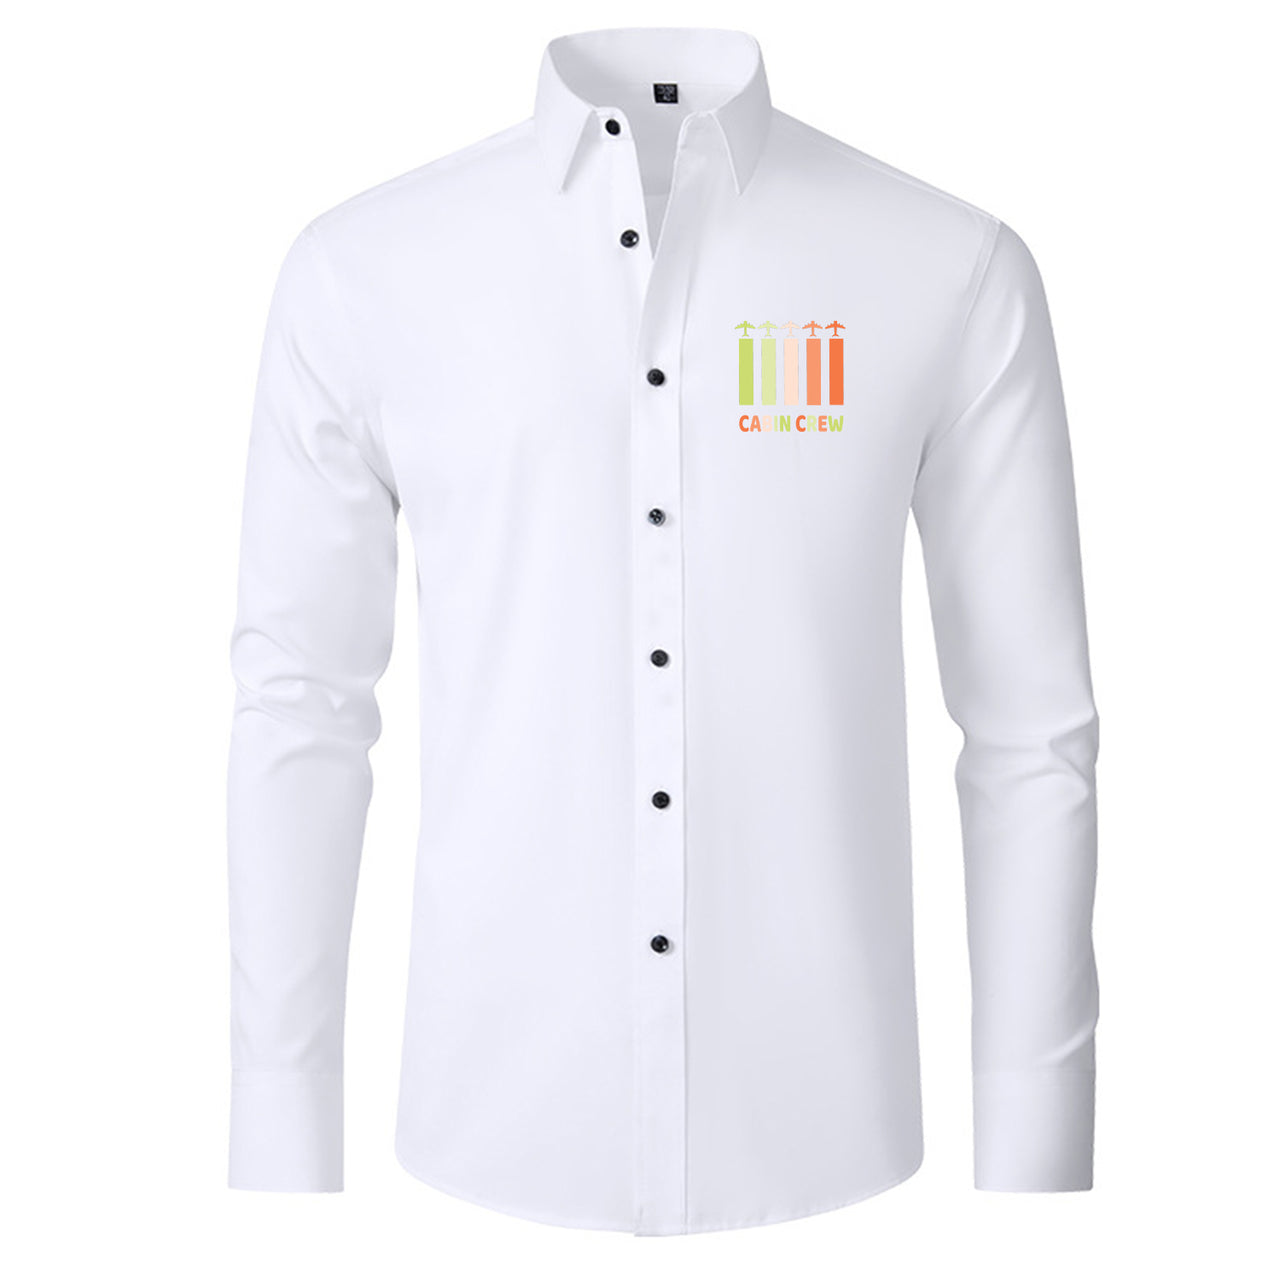 Colourful Cabin Crew Designed Long Sleeve Shirts